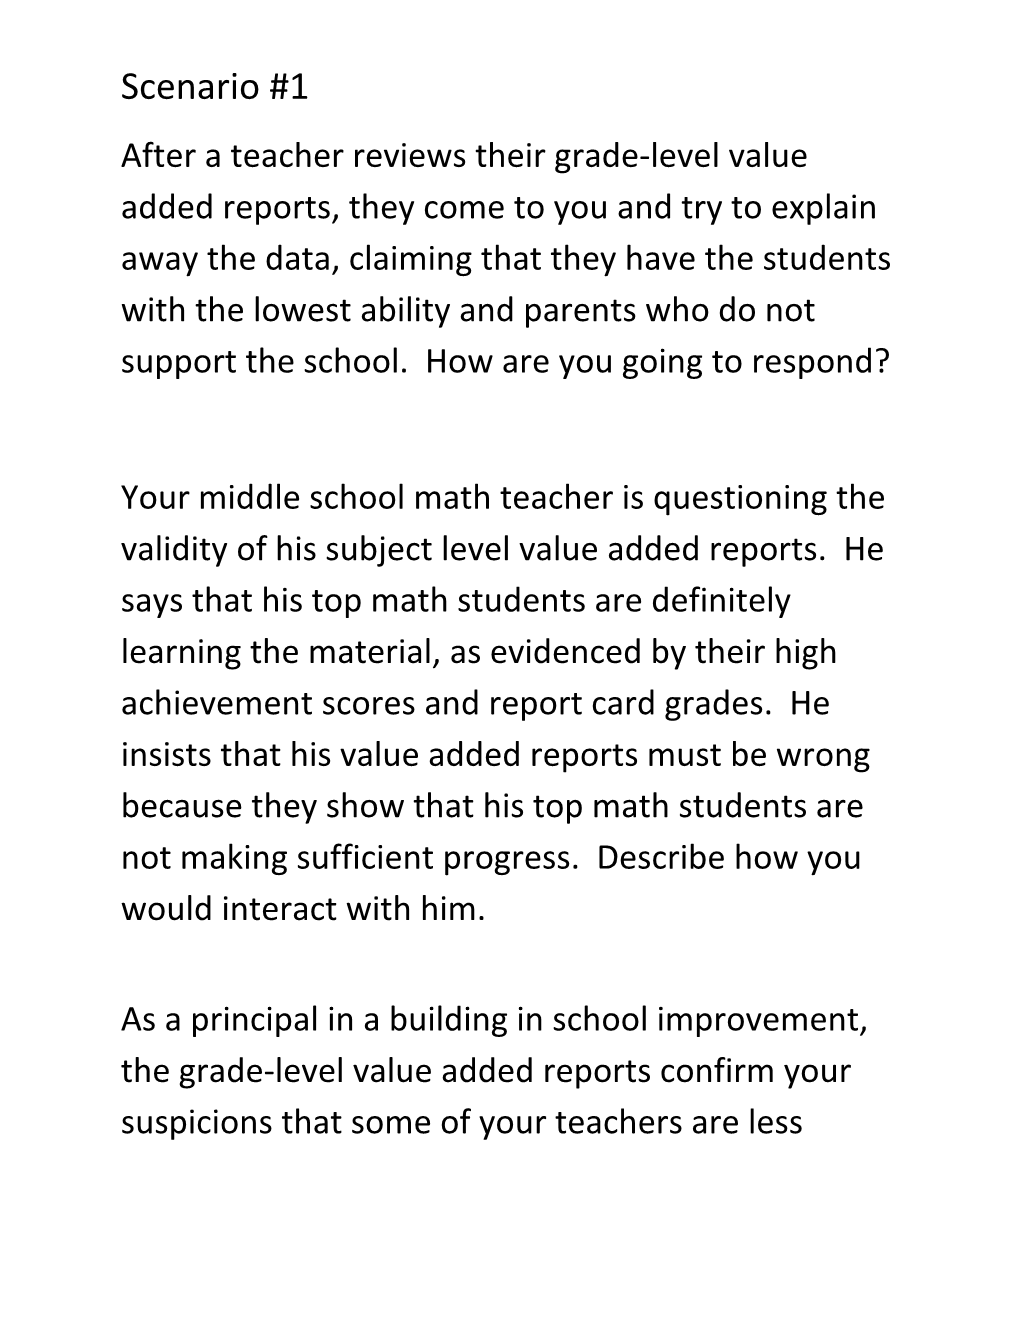 After a Teacher Reviews Their Grade-Level Value Added Reports, They Come to You and Try